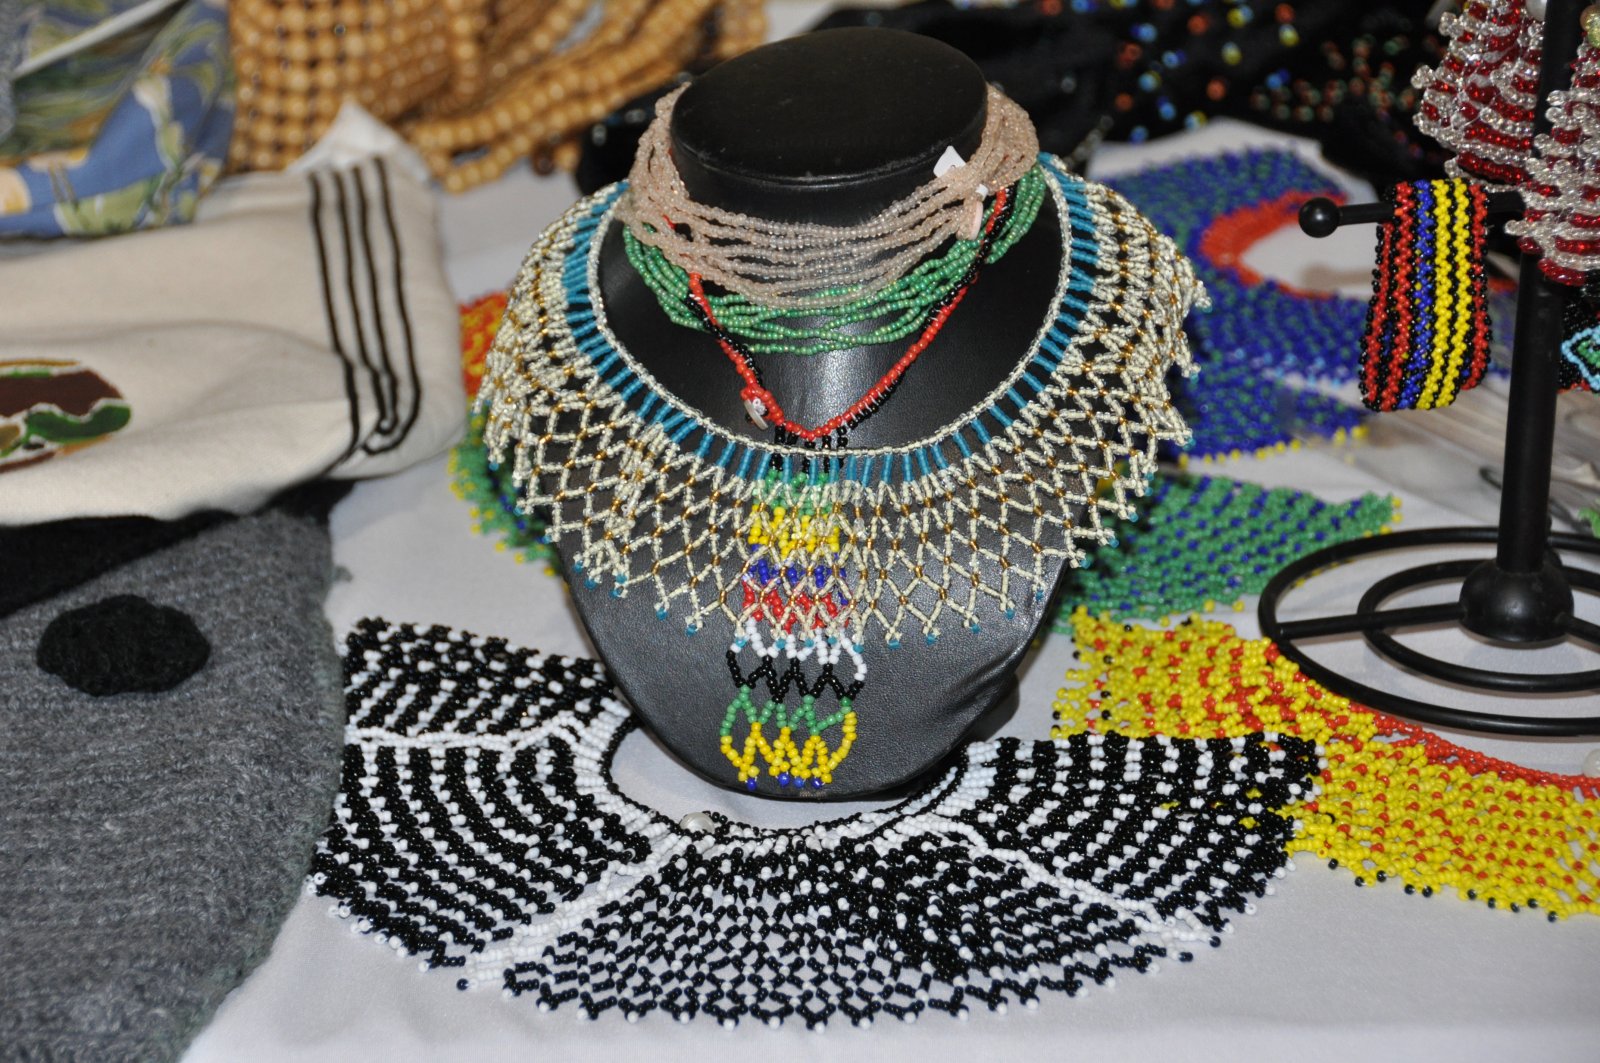 This work was done by women who own a beading business based in the informal settlements of Masiphulele in the Western Cape Province.